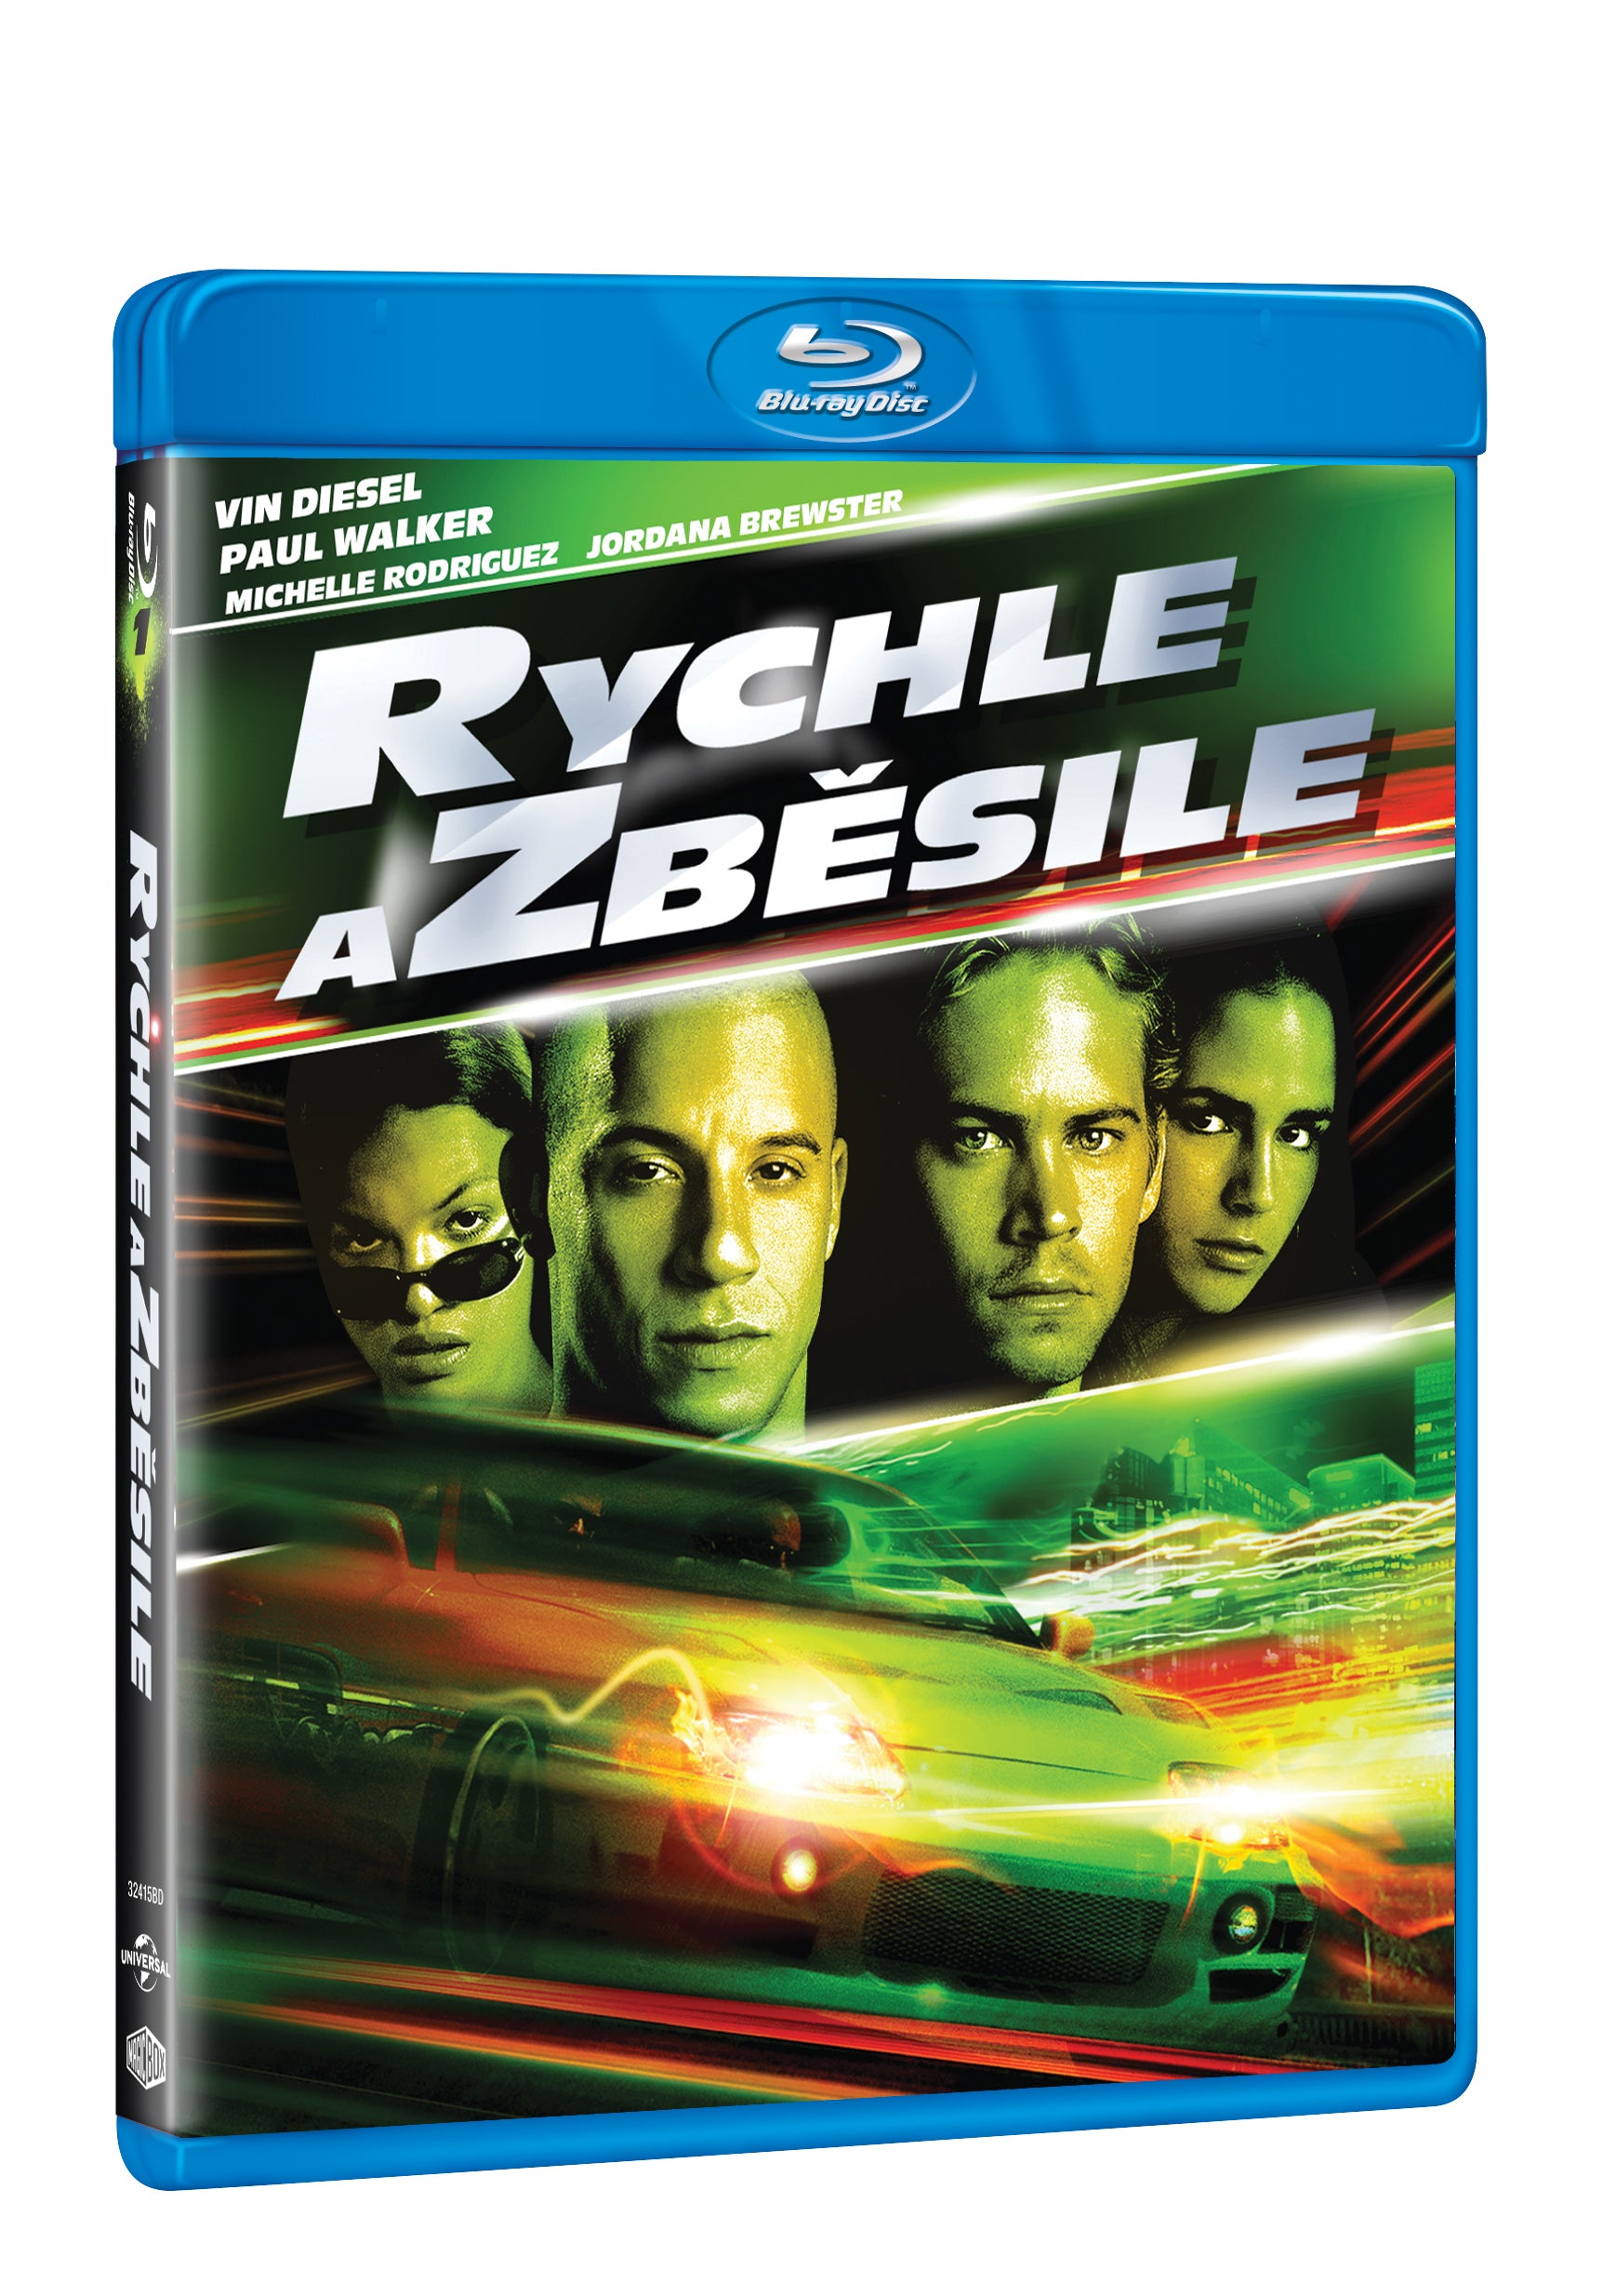 Rychle a zbesile BD / The Fast and the Furious - Czech version